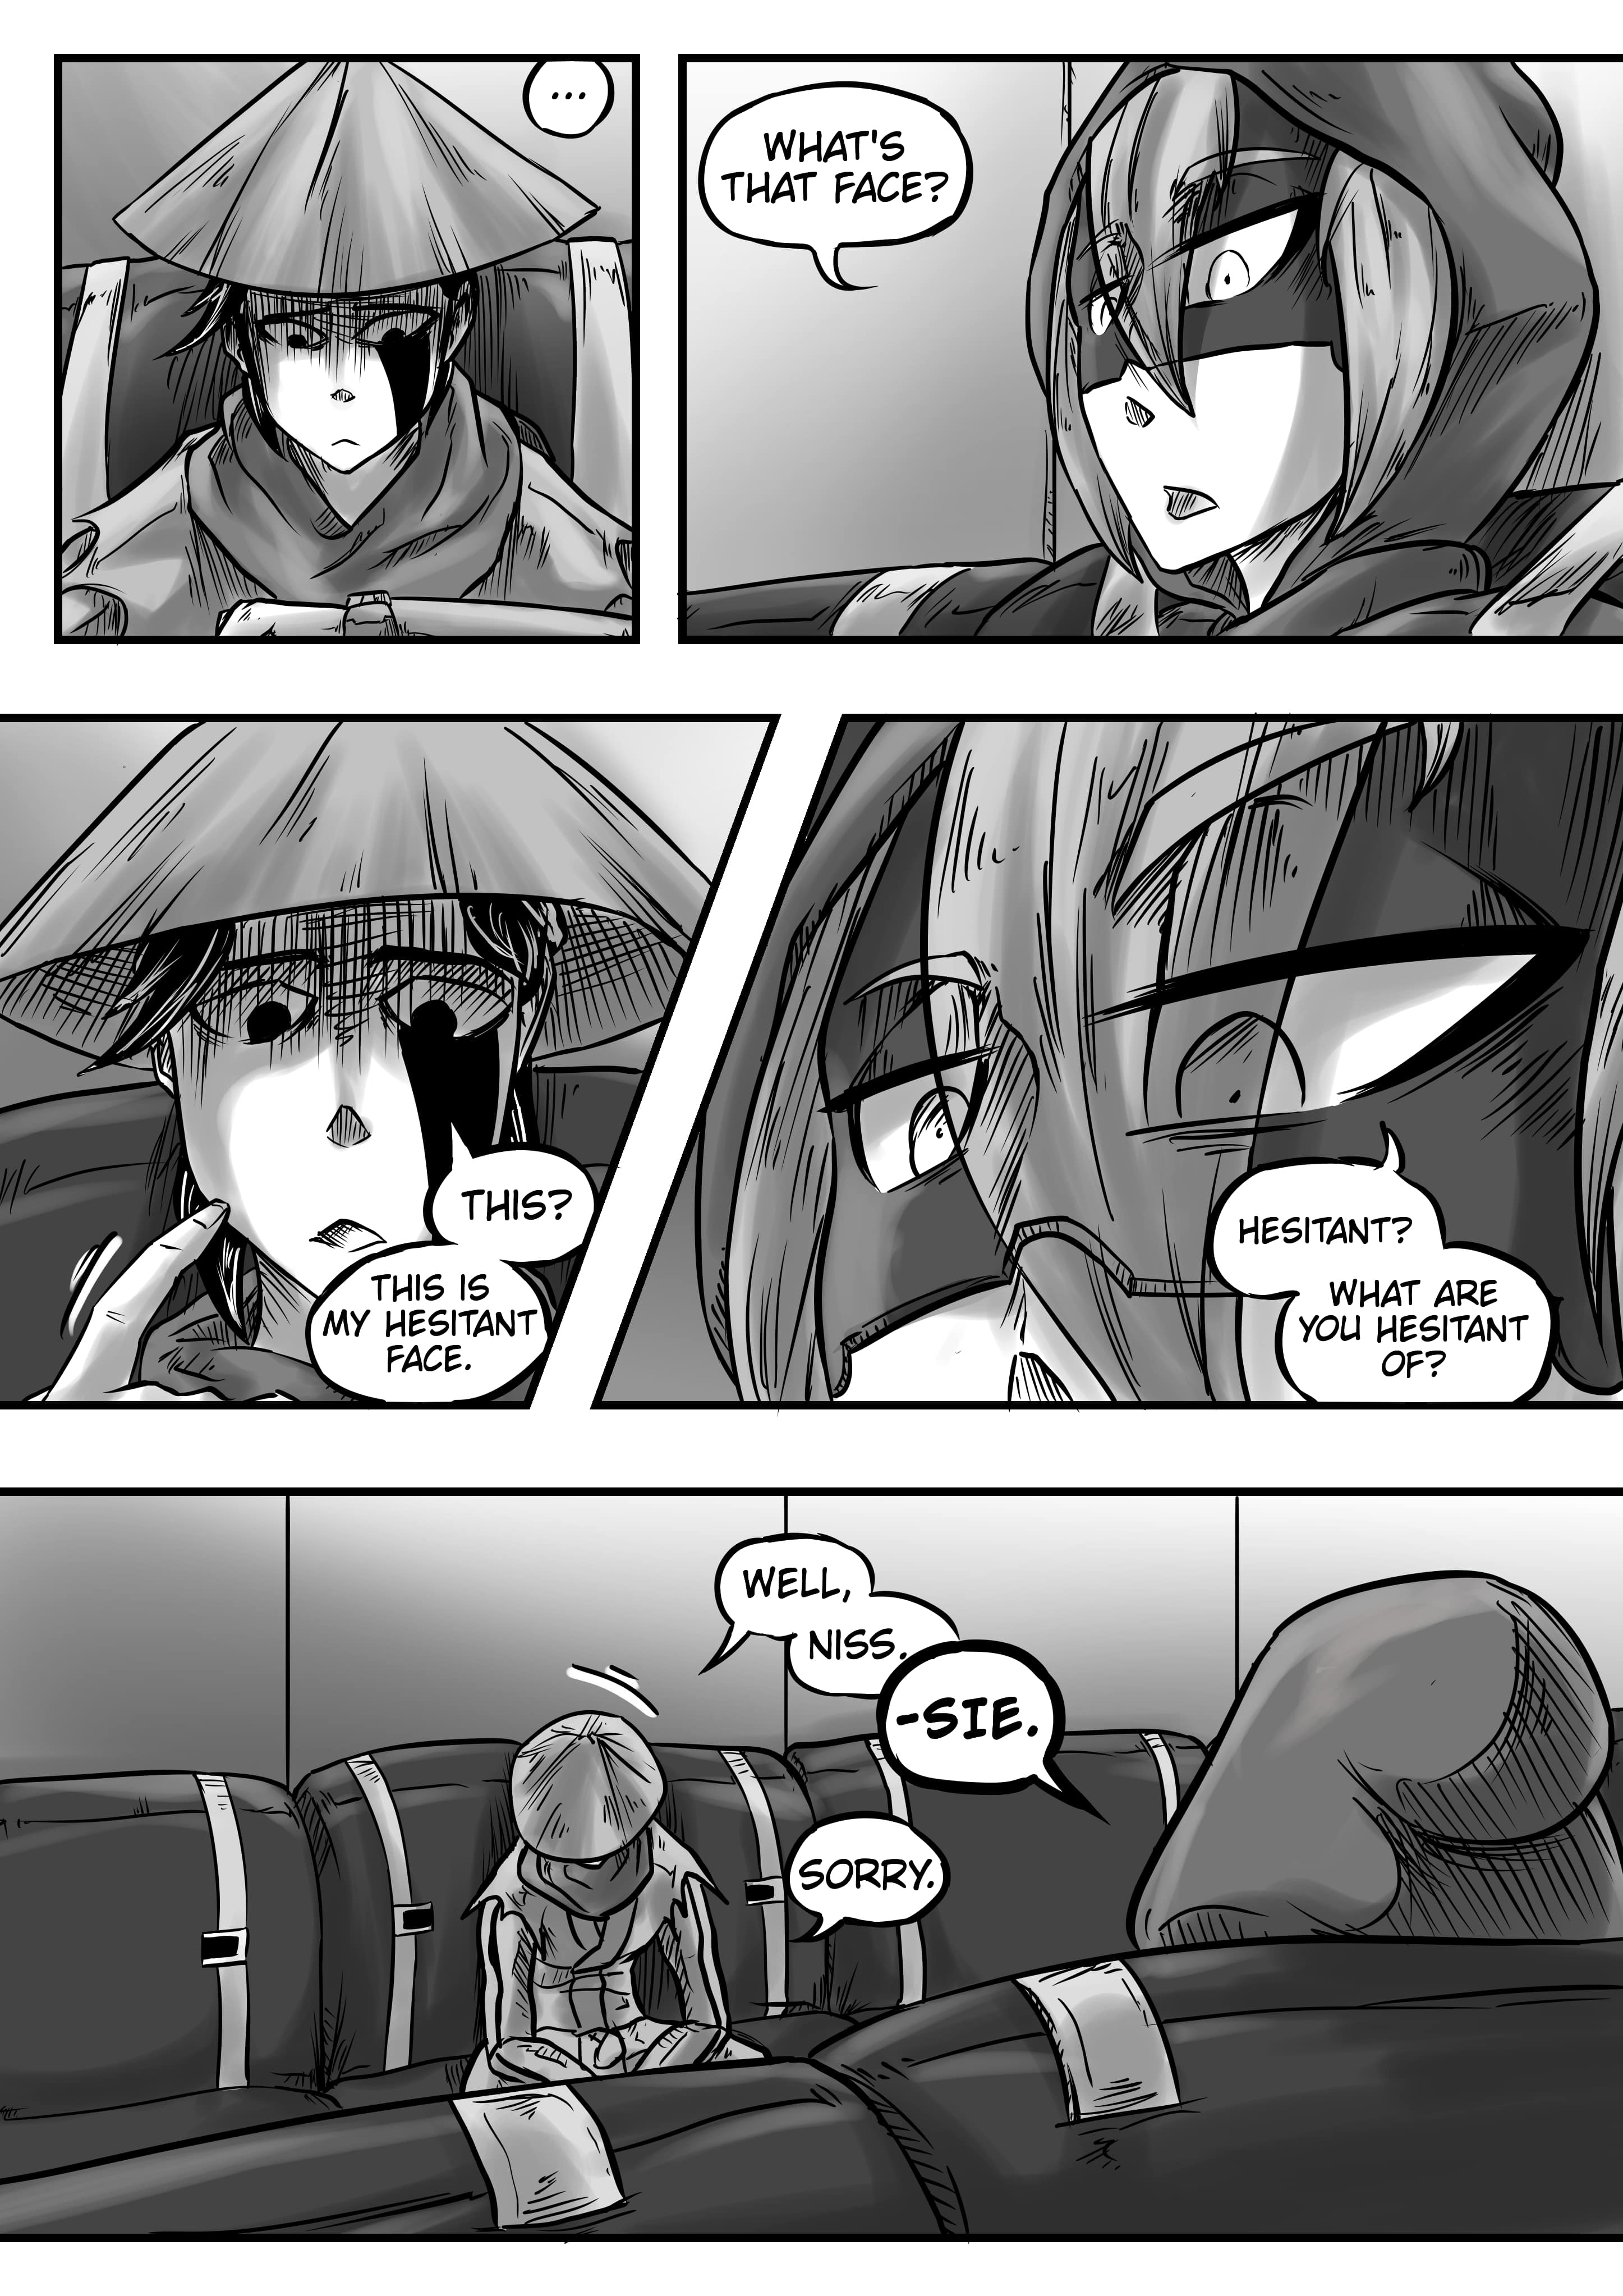 The Golden Dimension - Page 2